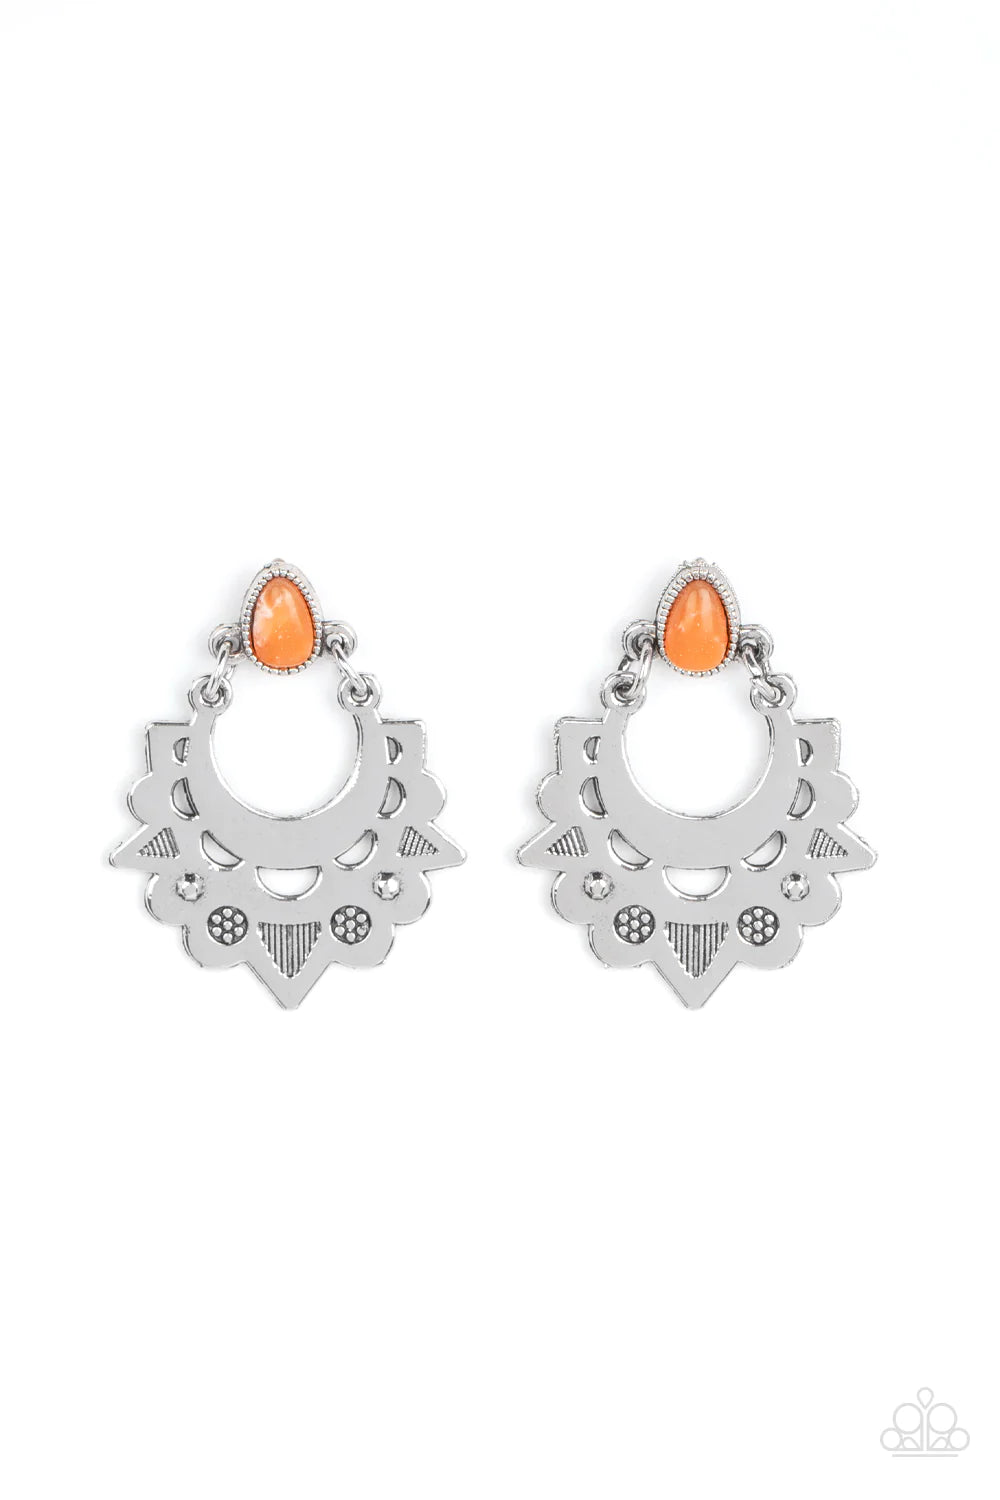 Paparazzi Accessories Earthy Zeal - Orange Stamped in stripes and studded in floral details, a scalloped silver frame swings from the bottom of an earthy orange stone teardrop for a vivacious effect. Earring attaches to a standard post fitting.